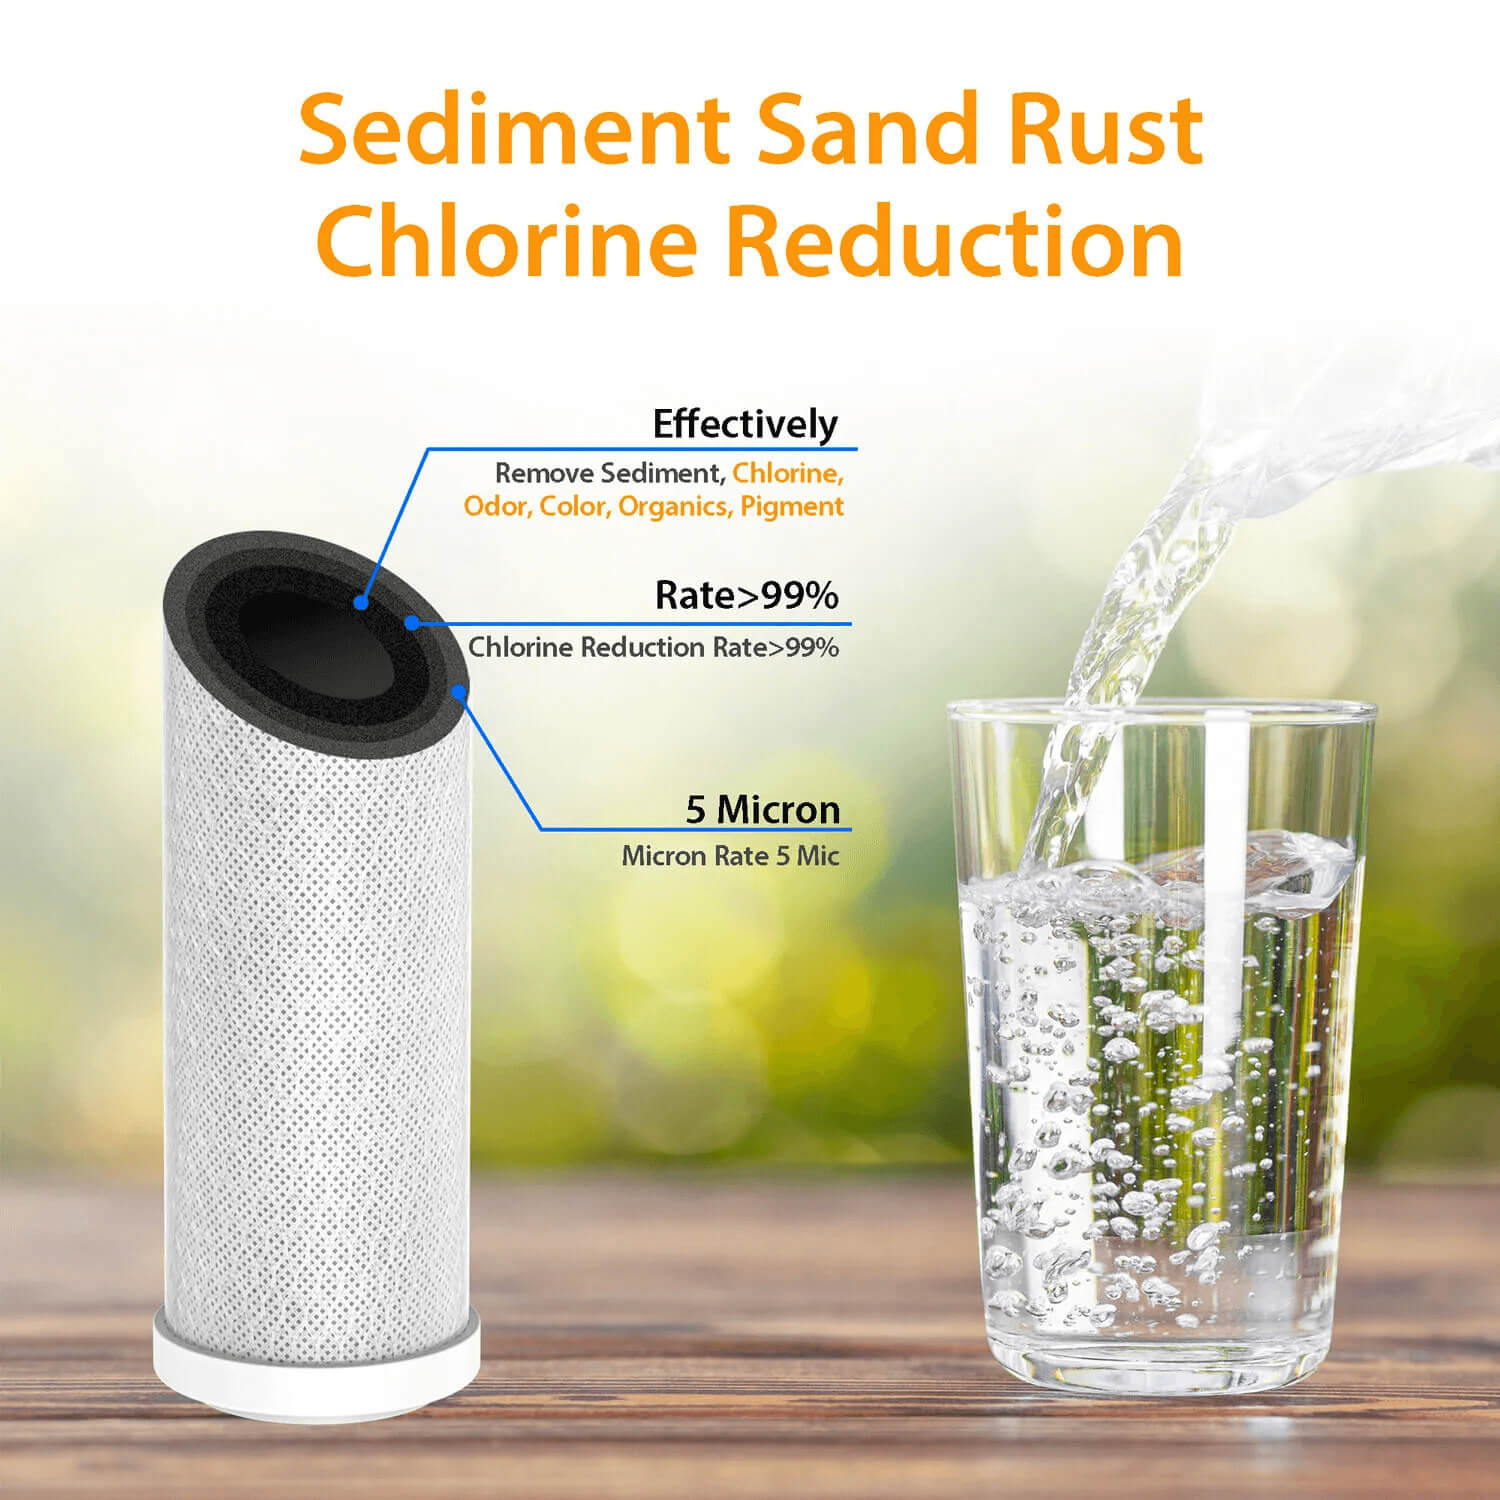 Membrane Solutions Coconut Shell Activated Carbon Whole House Sediment Water Filter Cartridge Replacement | 5 Micron 10